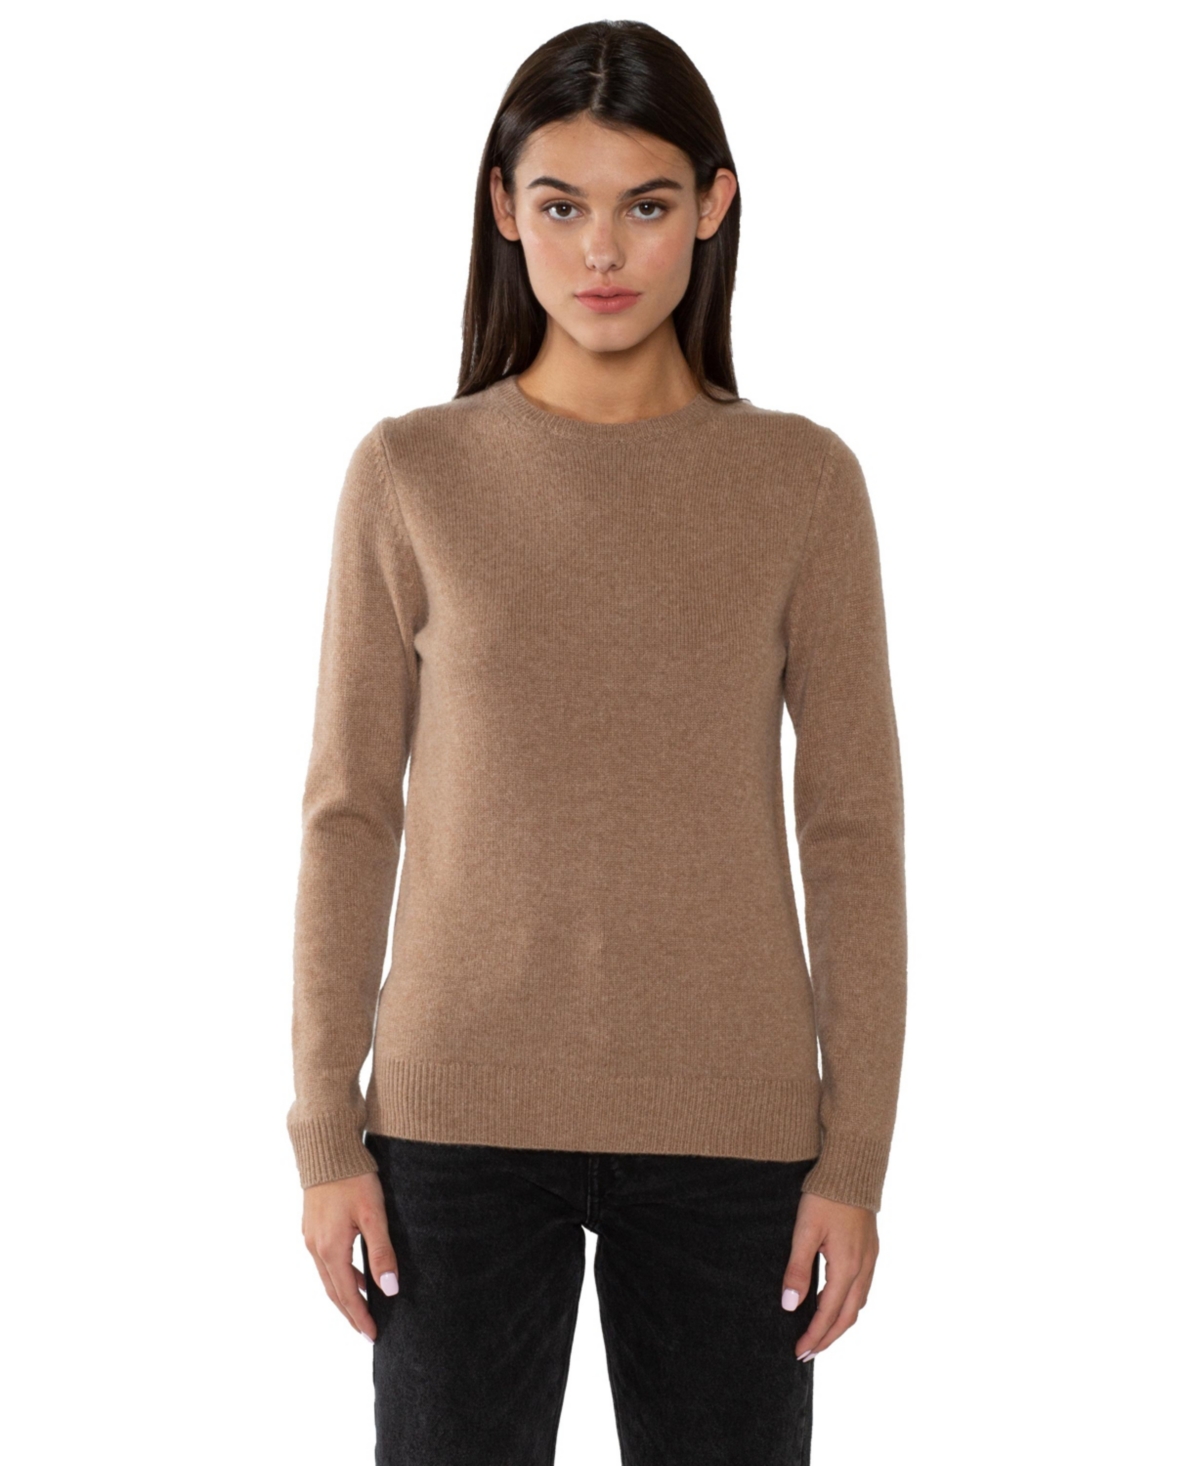 100% Pure Cashmere Extra-ply Cozy Long Sleeve Crew Neck Sweater - Saddle heather